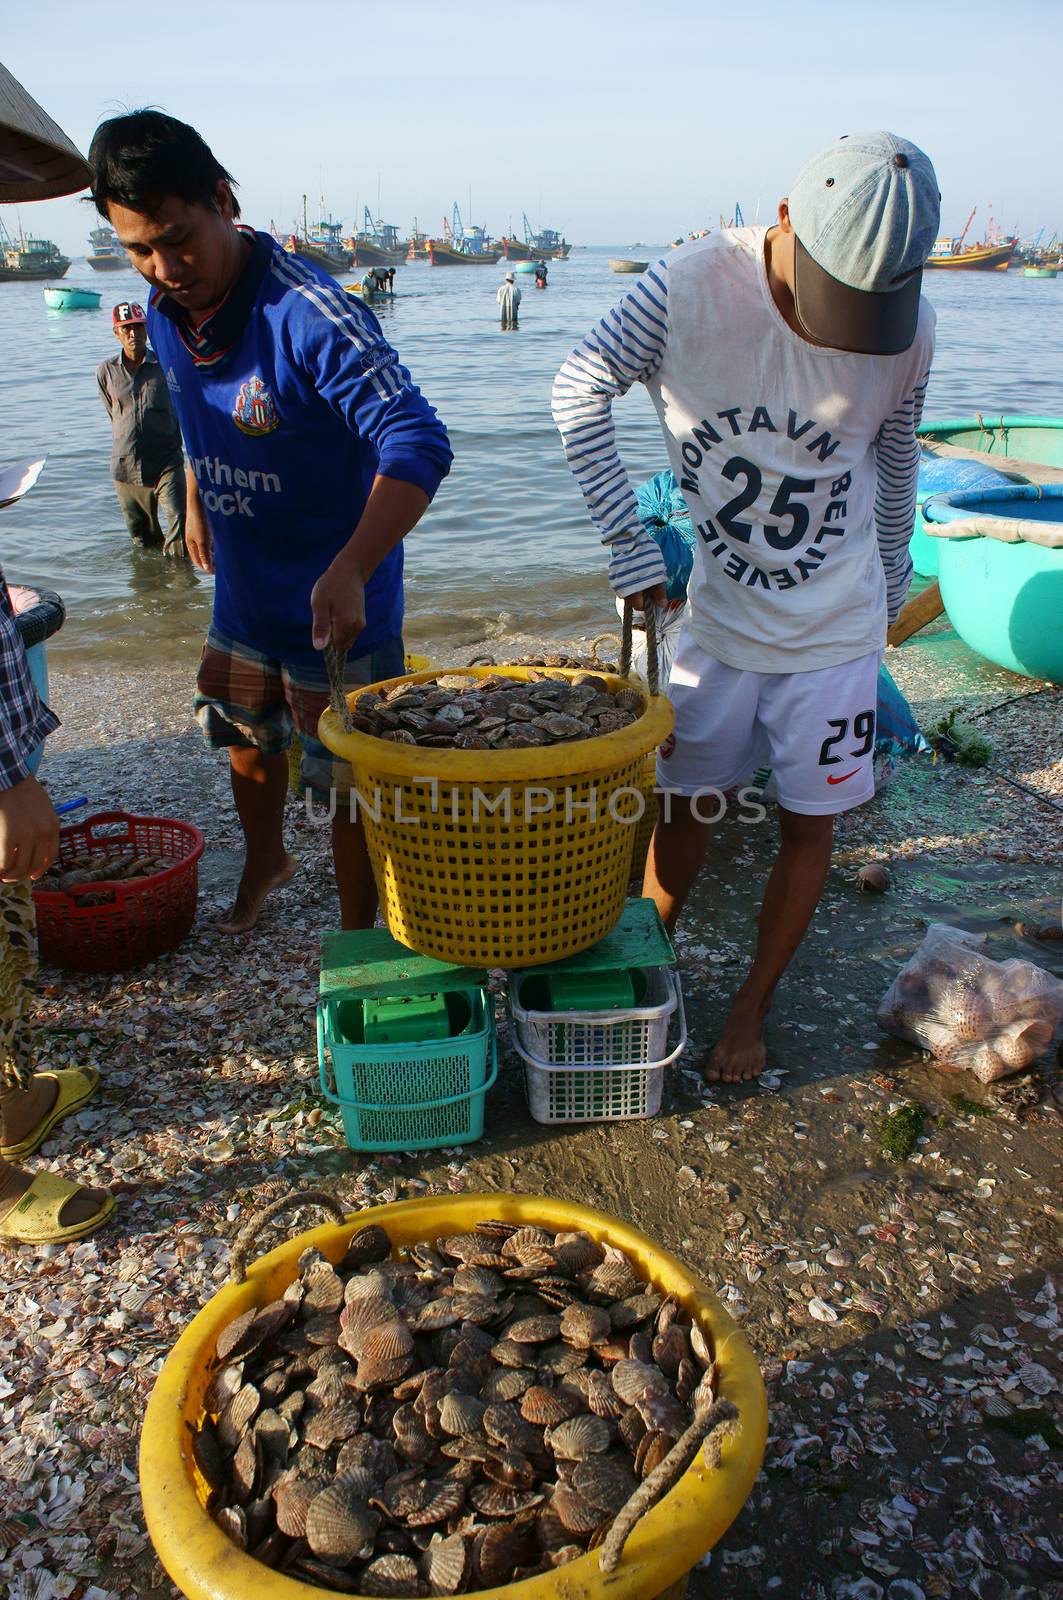 PHAN THIET- VIETNAM- JAN 21:  Seafood market on beach, people trader fishing product in morning, boat on water,  person carry fresh food, Viet Nam, Jan 21, 2014